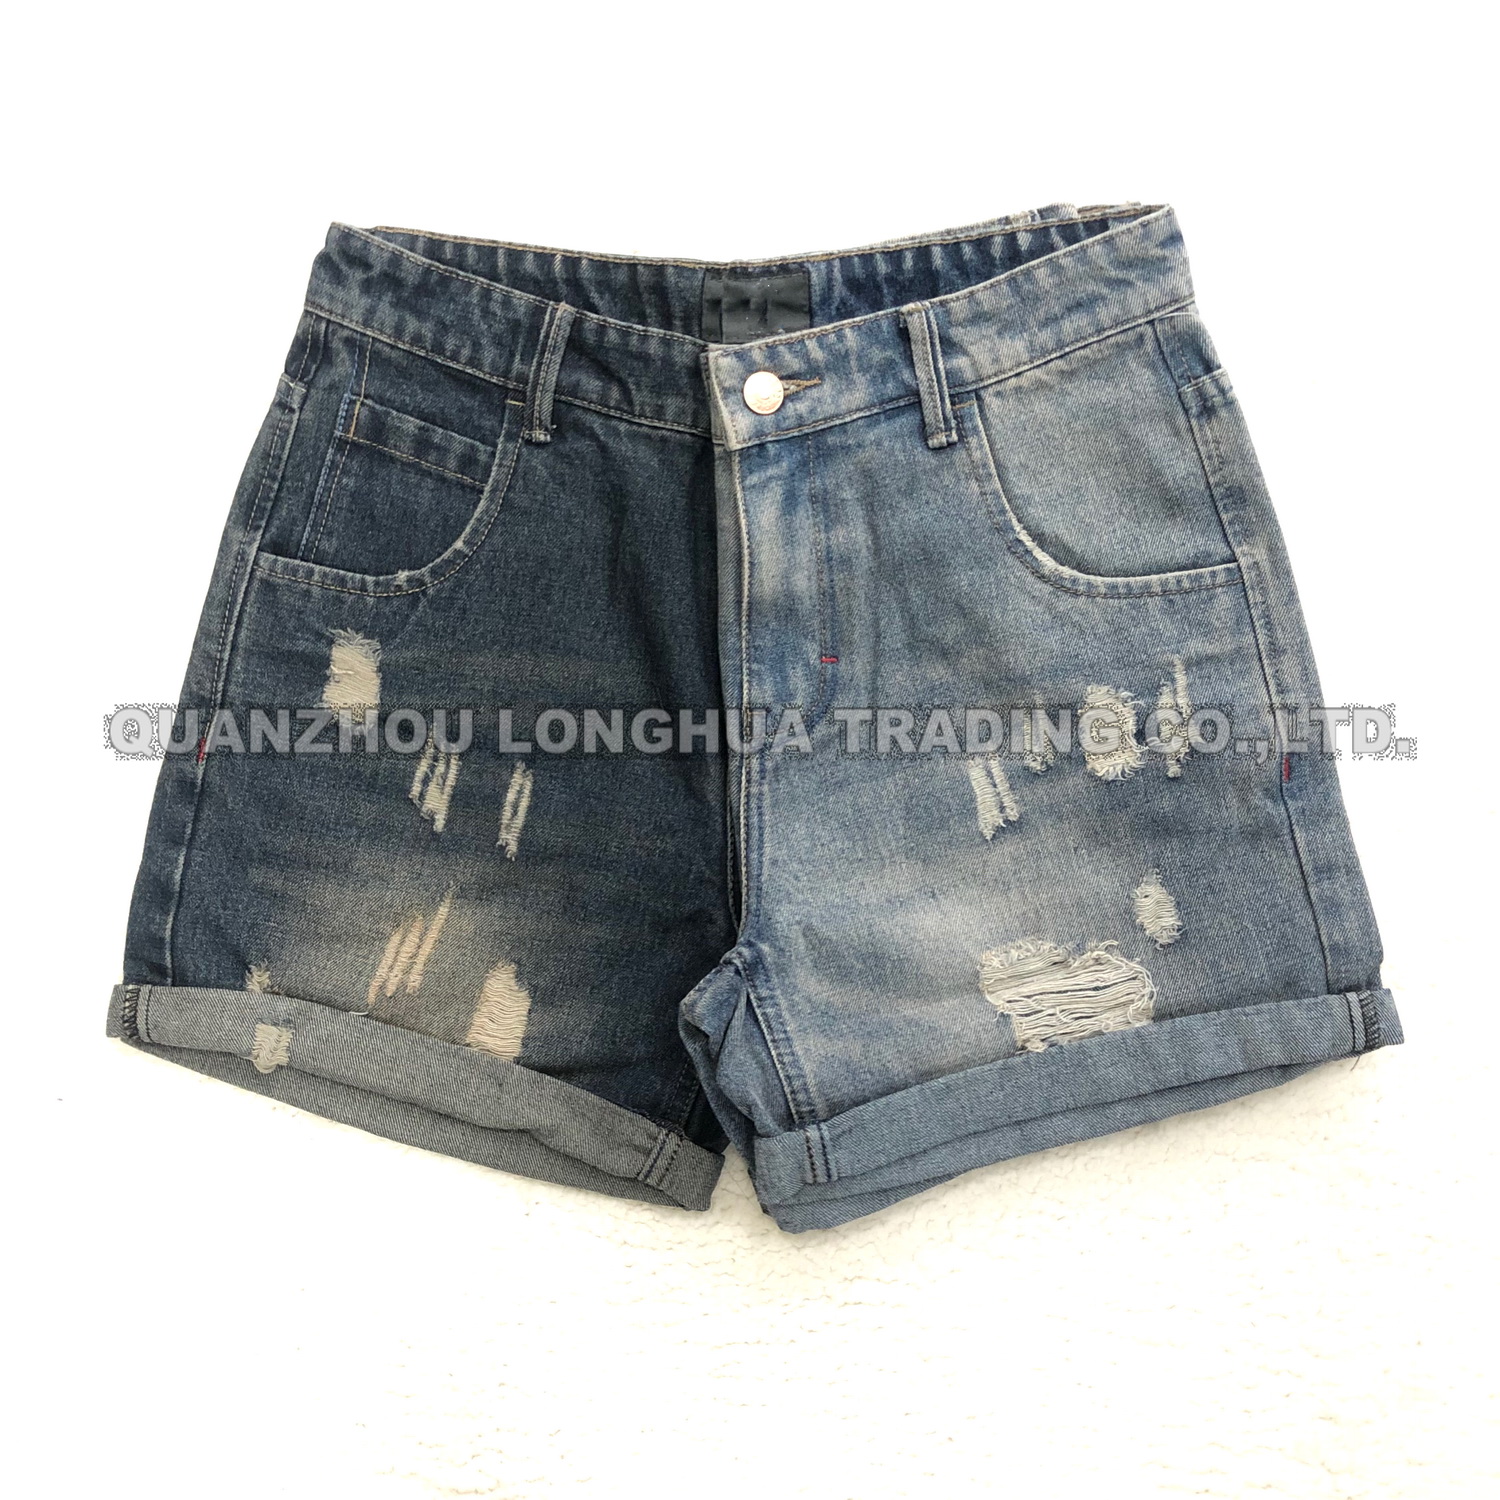 Ladys and Girls Denim Shorts Jeans Apparel Trousers New Fashion Cotton Hole